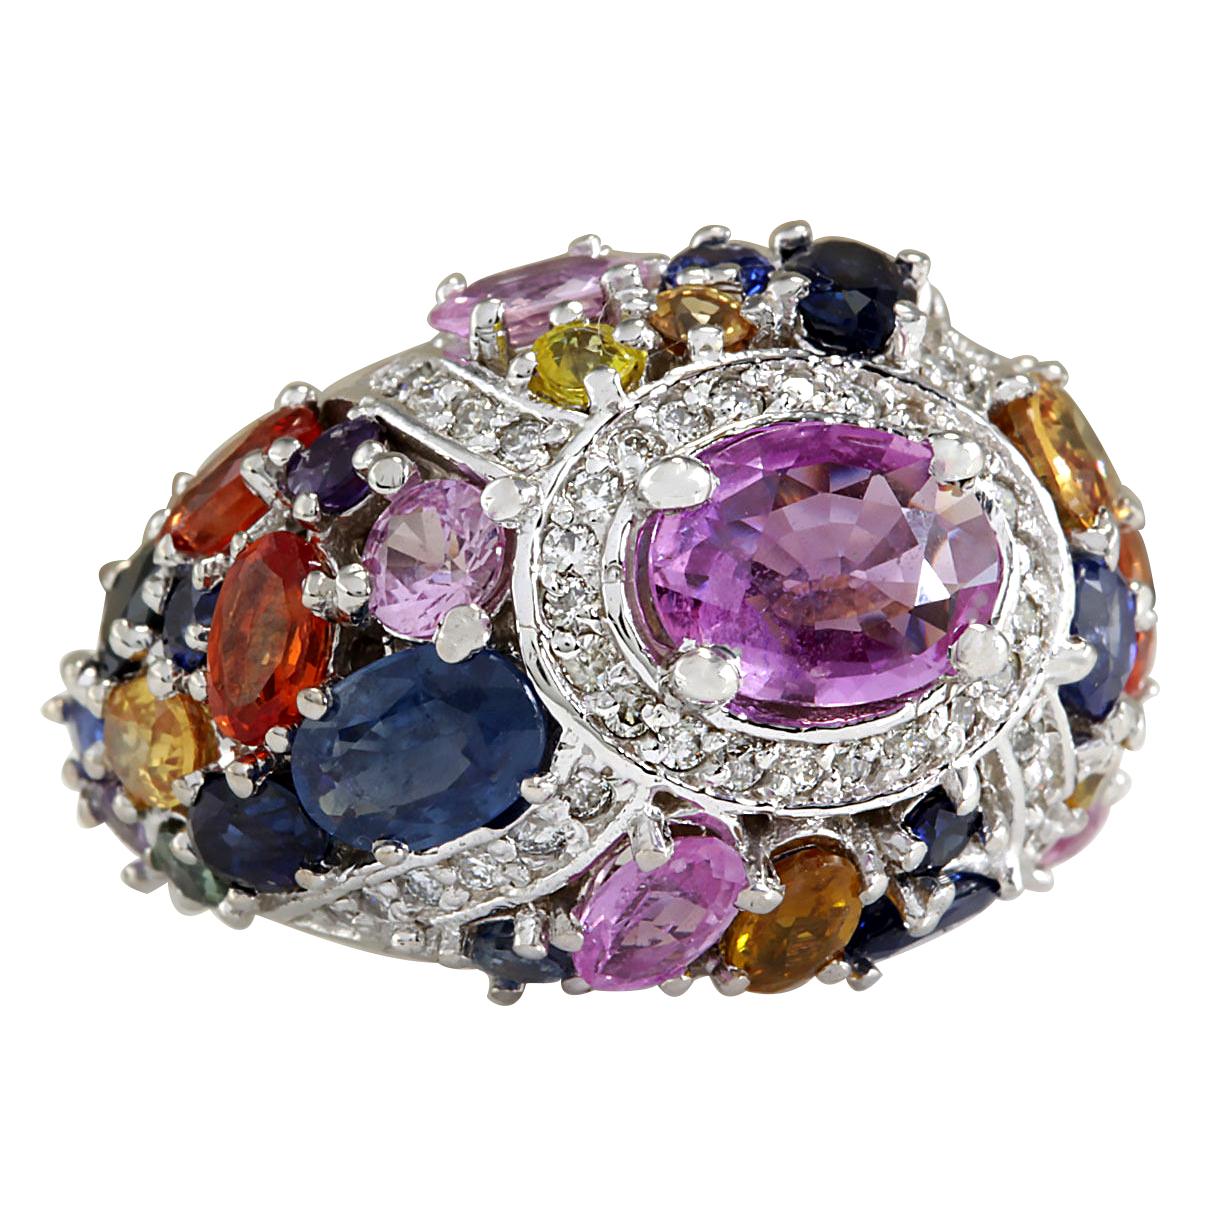 6.83 Carat Natural Sapphire 14 Karat White Gold Diamond Ring
Stamped: 14K White Gold
Total Ring Weight: 11.0 Grams
Total Natural Center Sapphire Weight is 1.12 Carat (Measures: 8.00x6.00 mm)
Color: Pink
Total Natural Side Sapphire Weight is 5.21